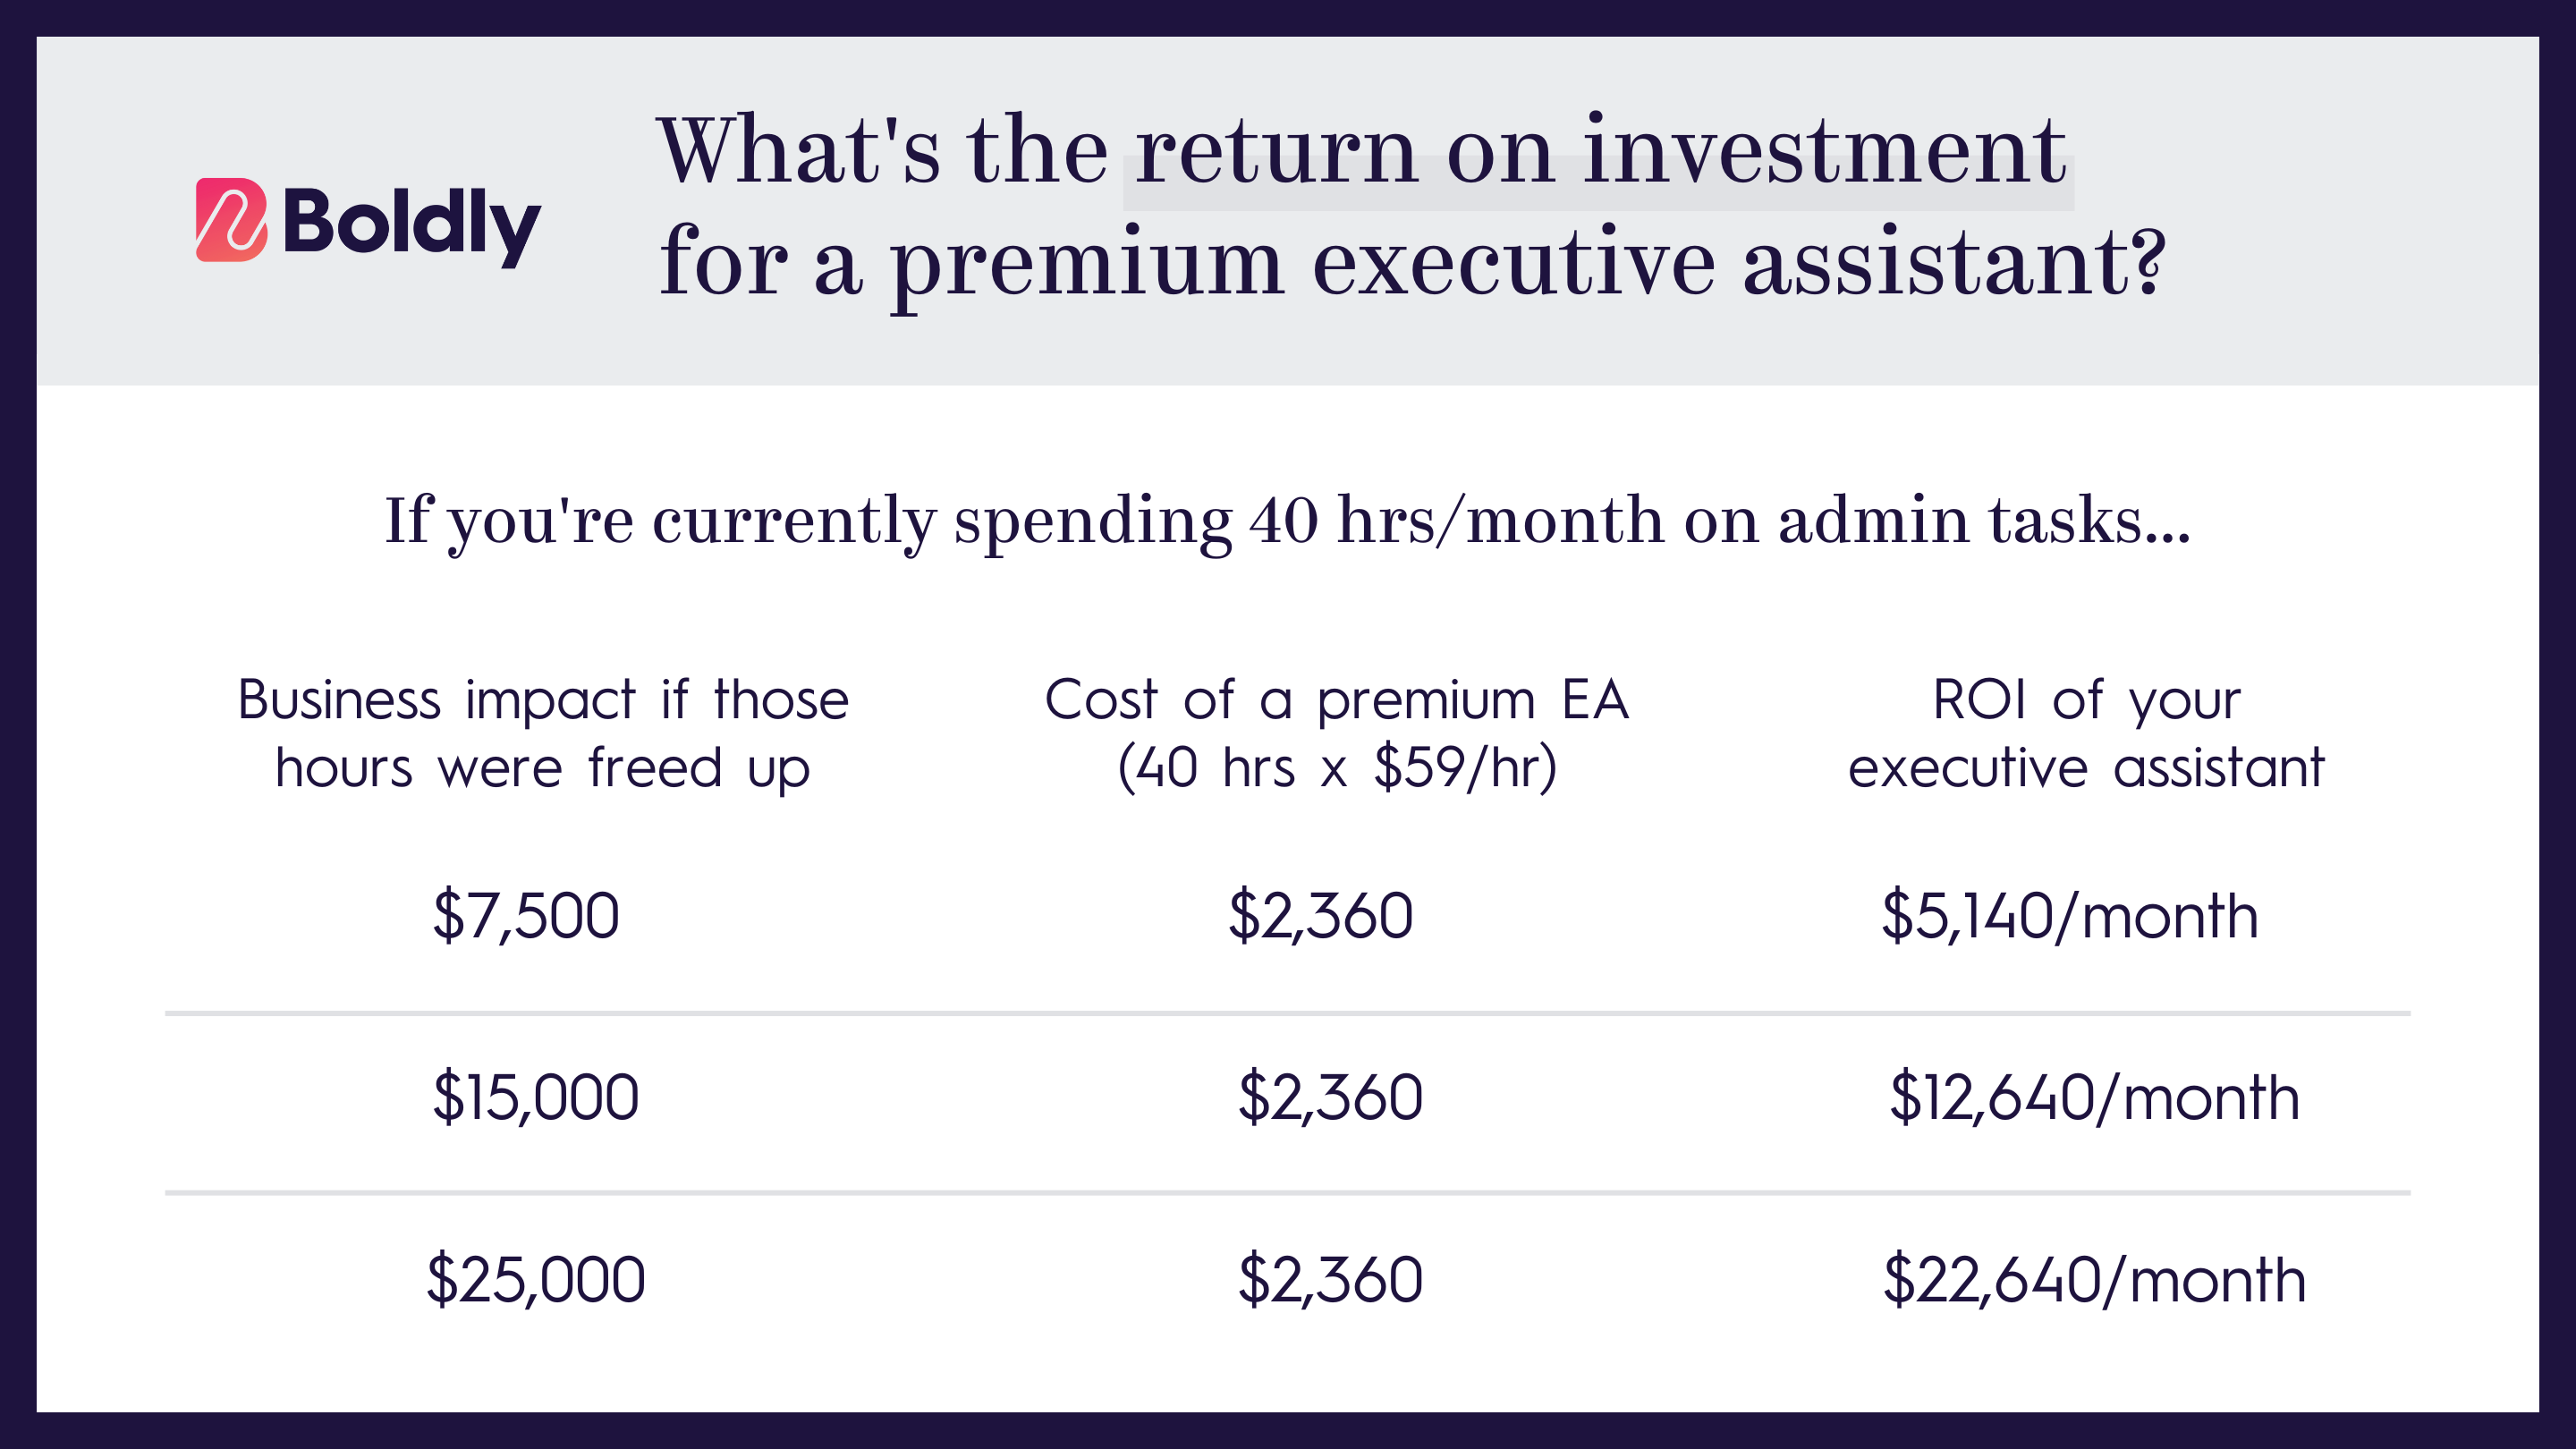 Chart showing the return on investment of an executive assistant at various salary levels